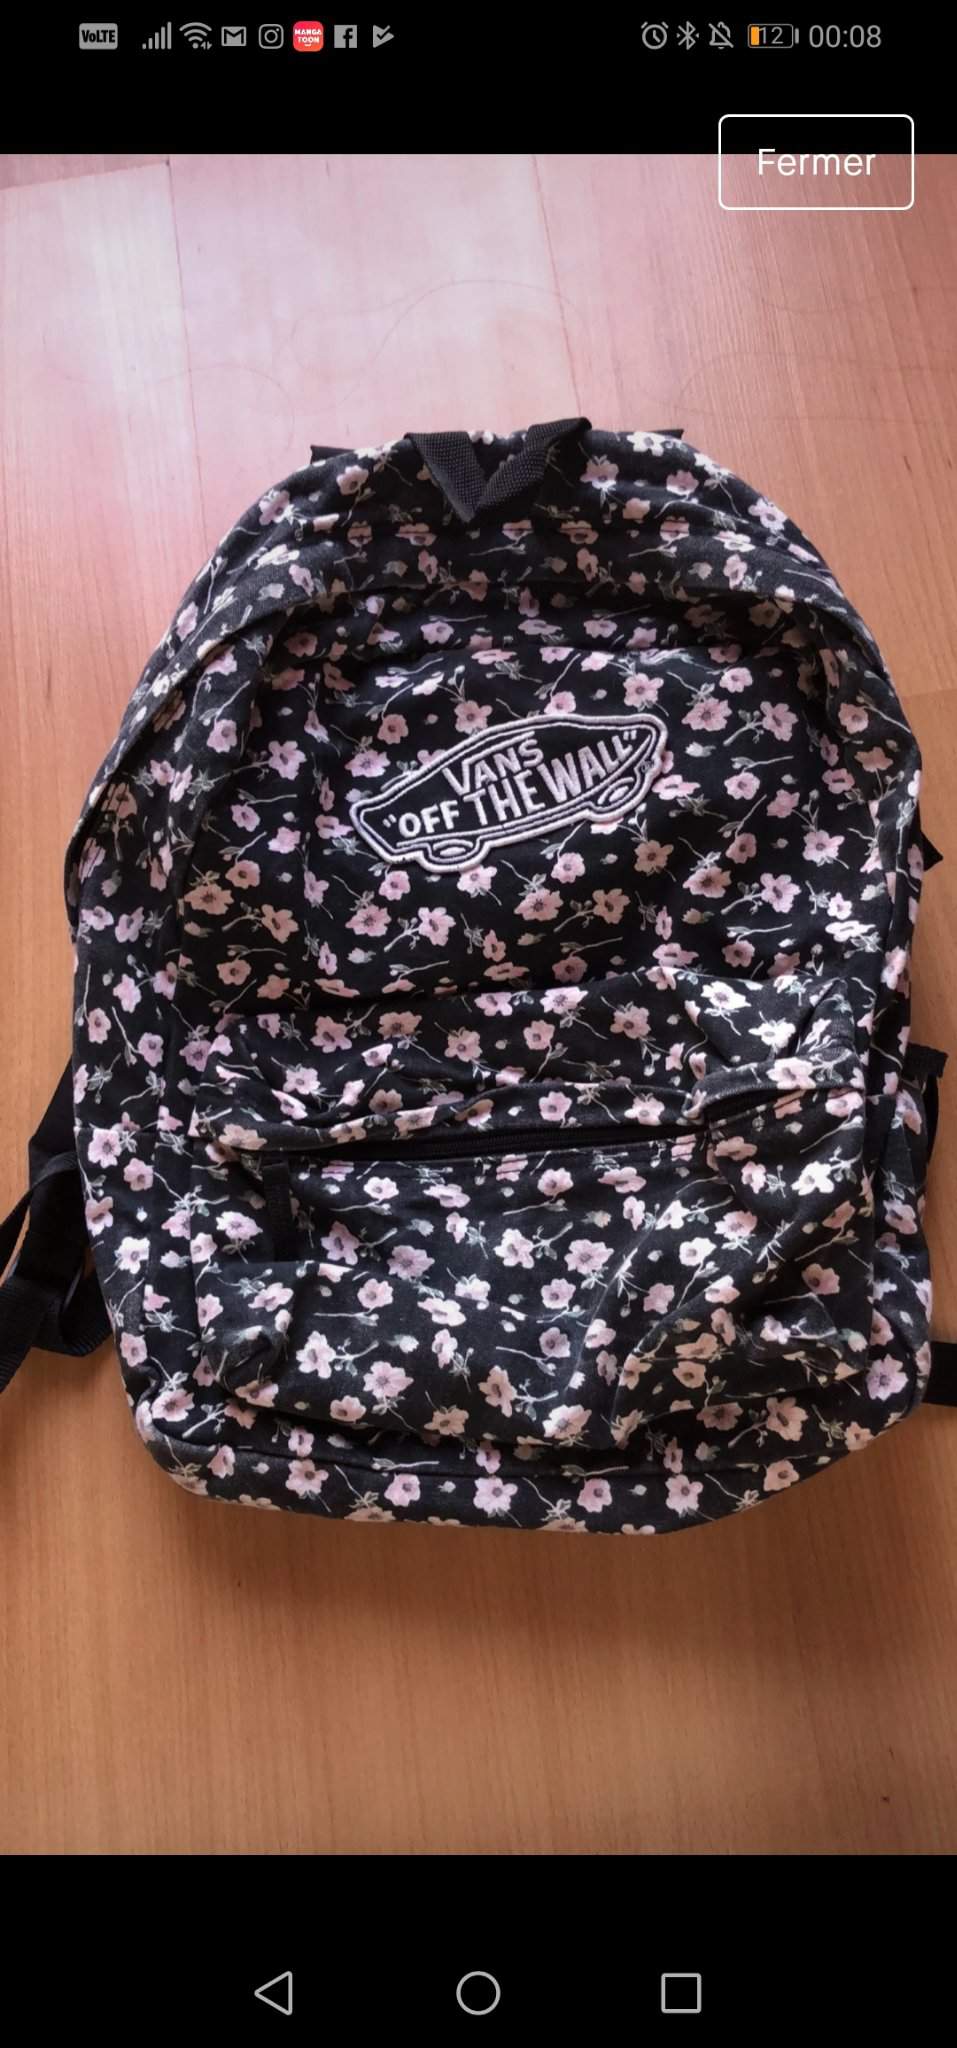 Is this bag (first photo) a fake vans 